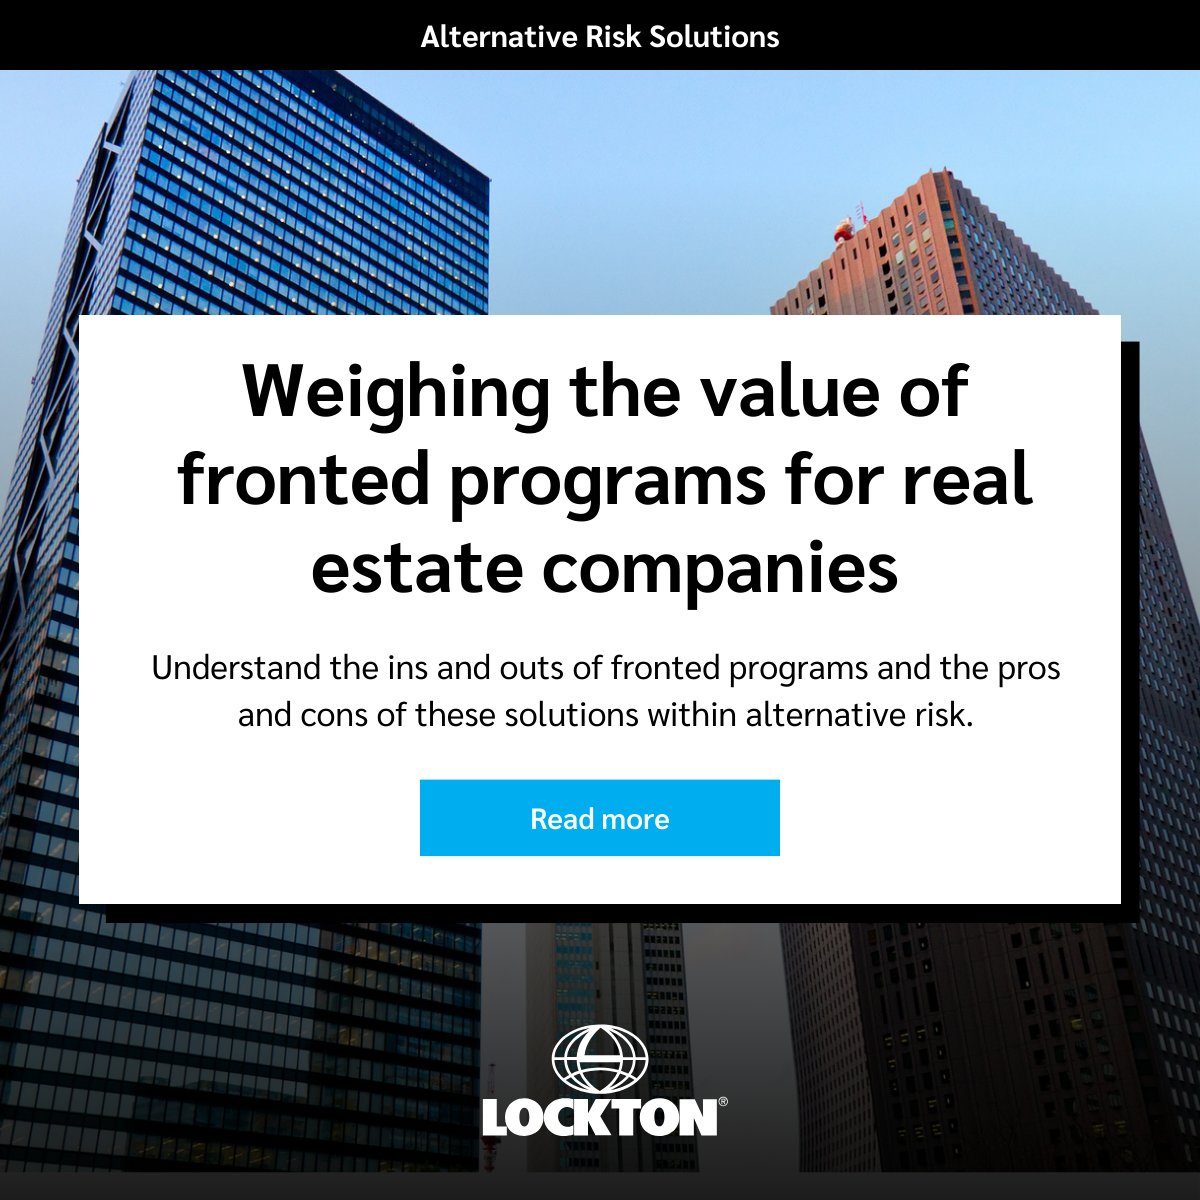 🏢💼 Real estate companies are looking for cost-effective insurance solutions that also meet lender requirements. As our experts Peter Rapciewicz and Philip Stack write, the answer may lie in alternative risk solutions, including fronted programs. global.lockton.com/us/en/news-ins…